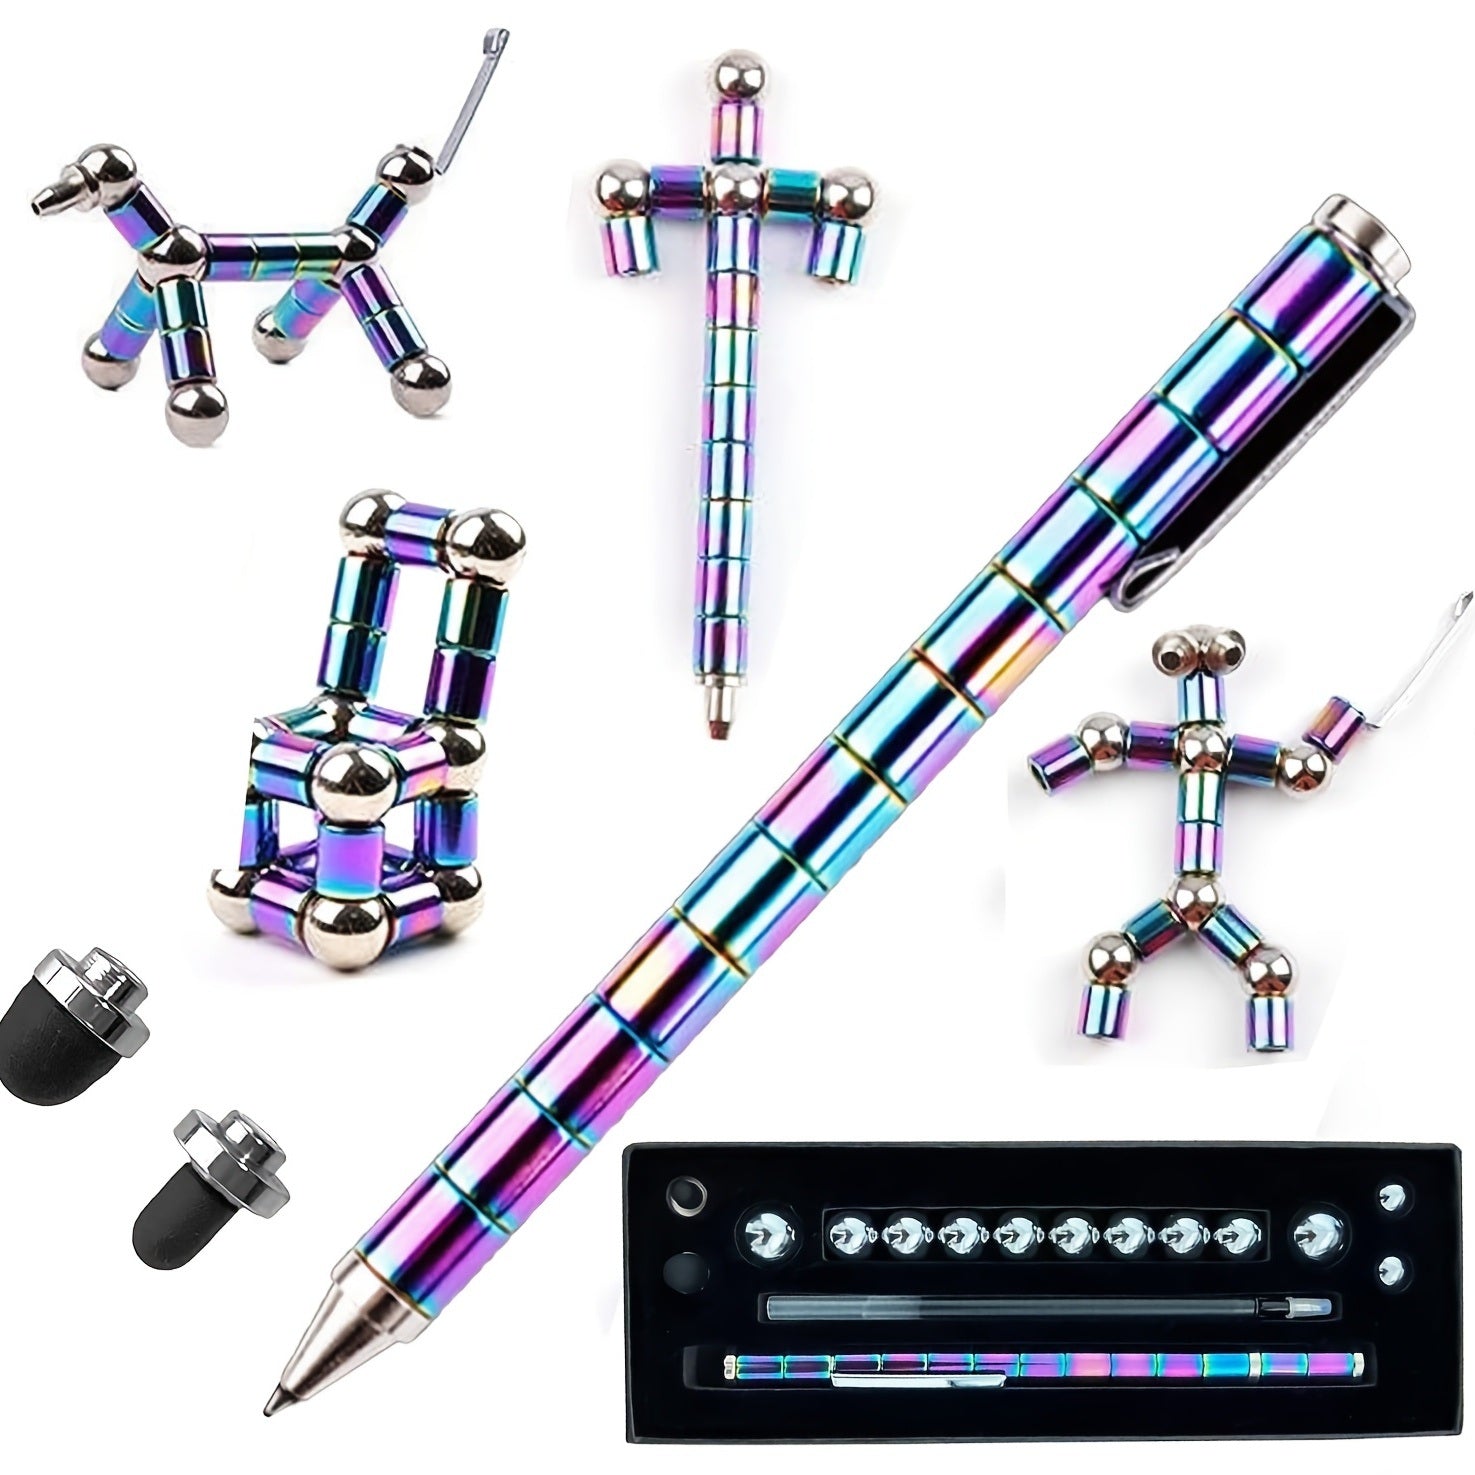 Colorful magnet rods and metal spheres set displayed in various configurations, alongside a Fidget Pen and a storage box.